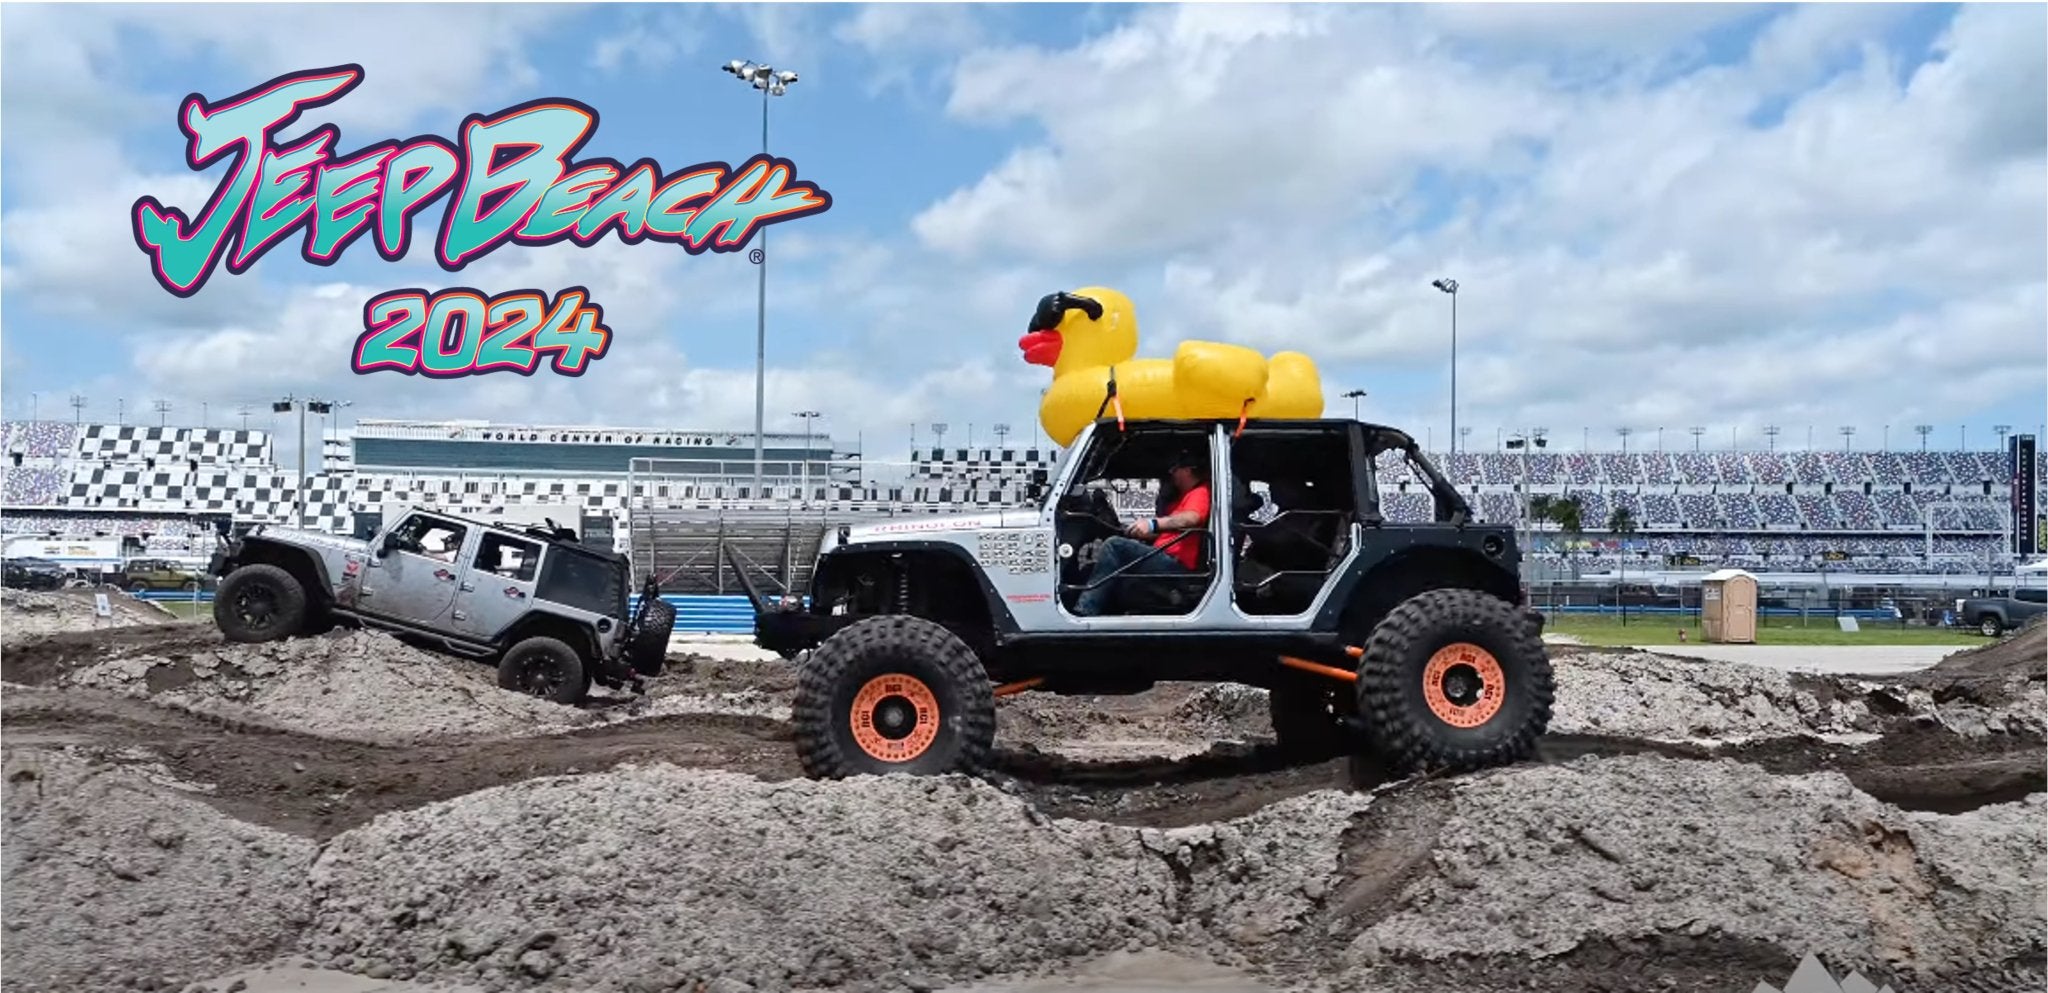 Jeep Beach: The Ultimate Guide to the Annual Jeep Gathering - Stinger